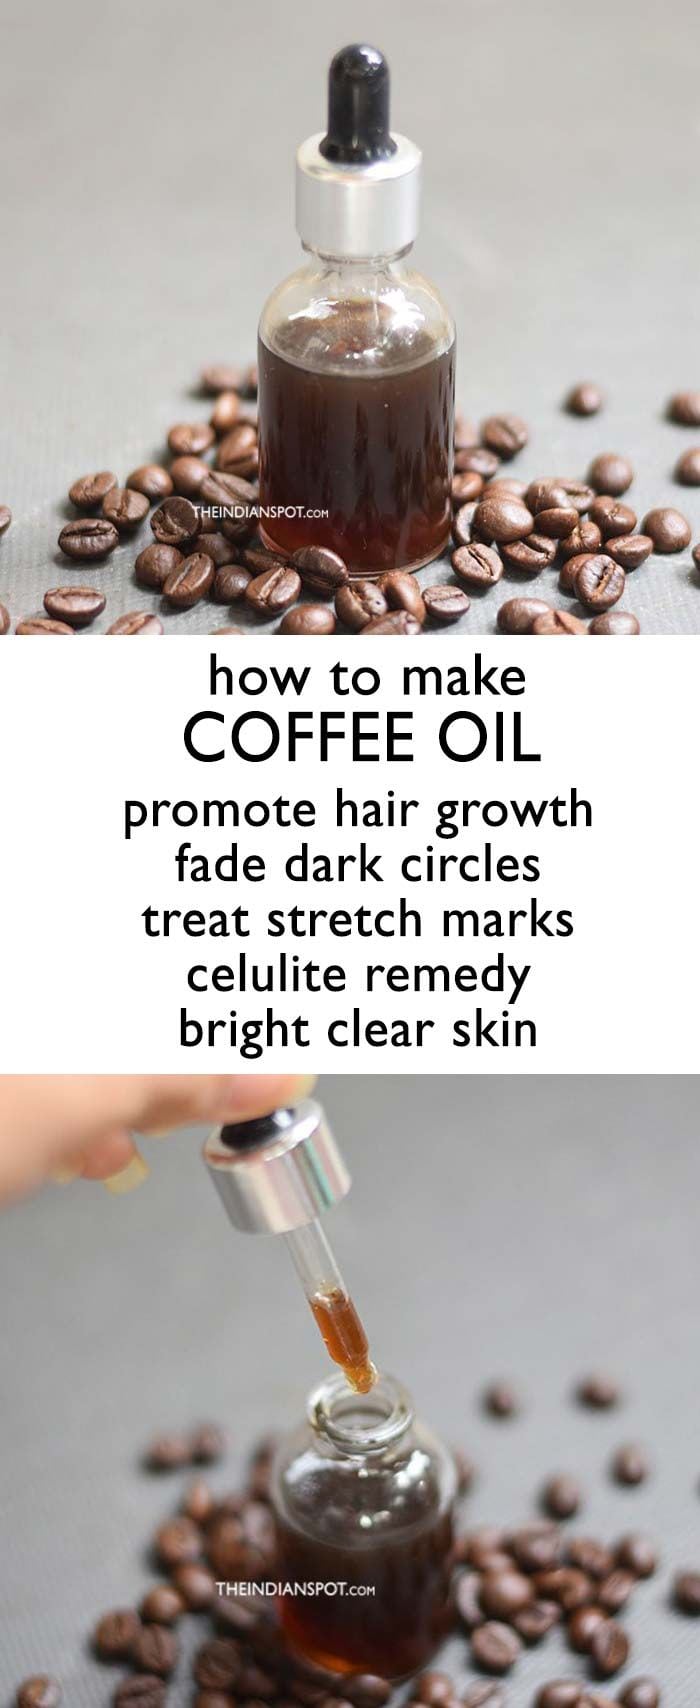 [ad_1]

If you are a coffee lover then you definitely love the products that are made from coffee. Coffee is an excellent beauty aid, it is full of antioxidants and …
Source by rikjej
[ad_2]
			
			…